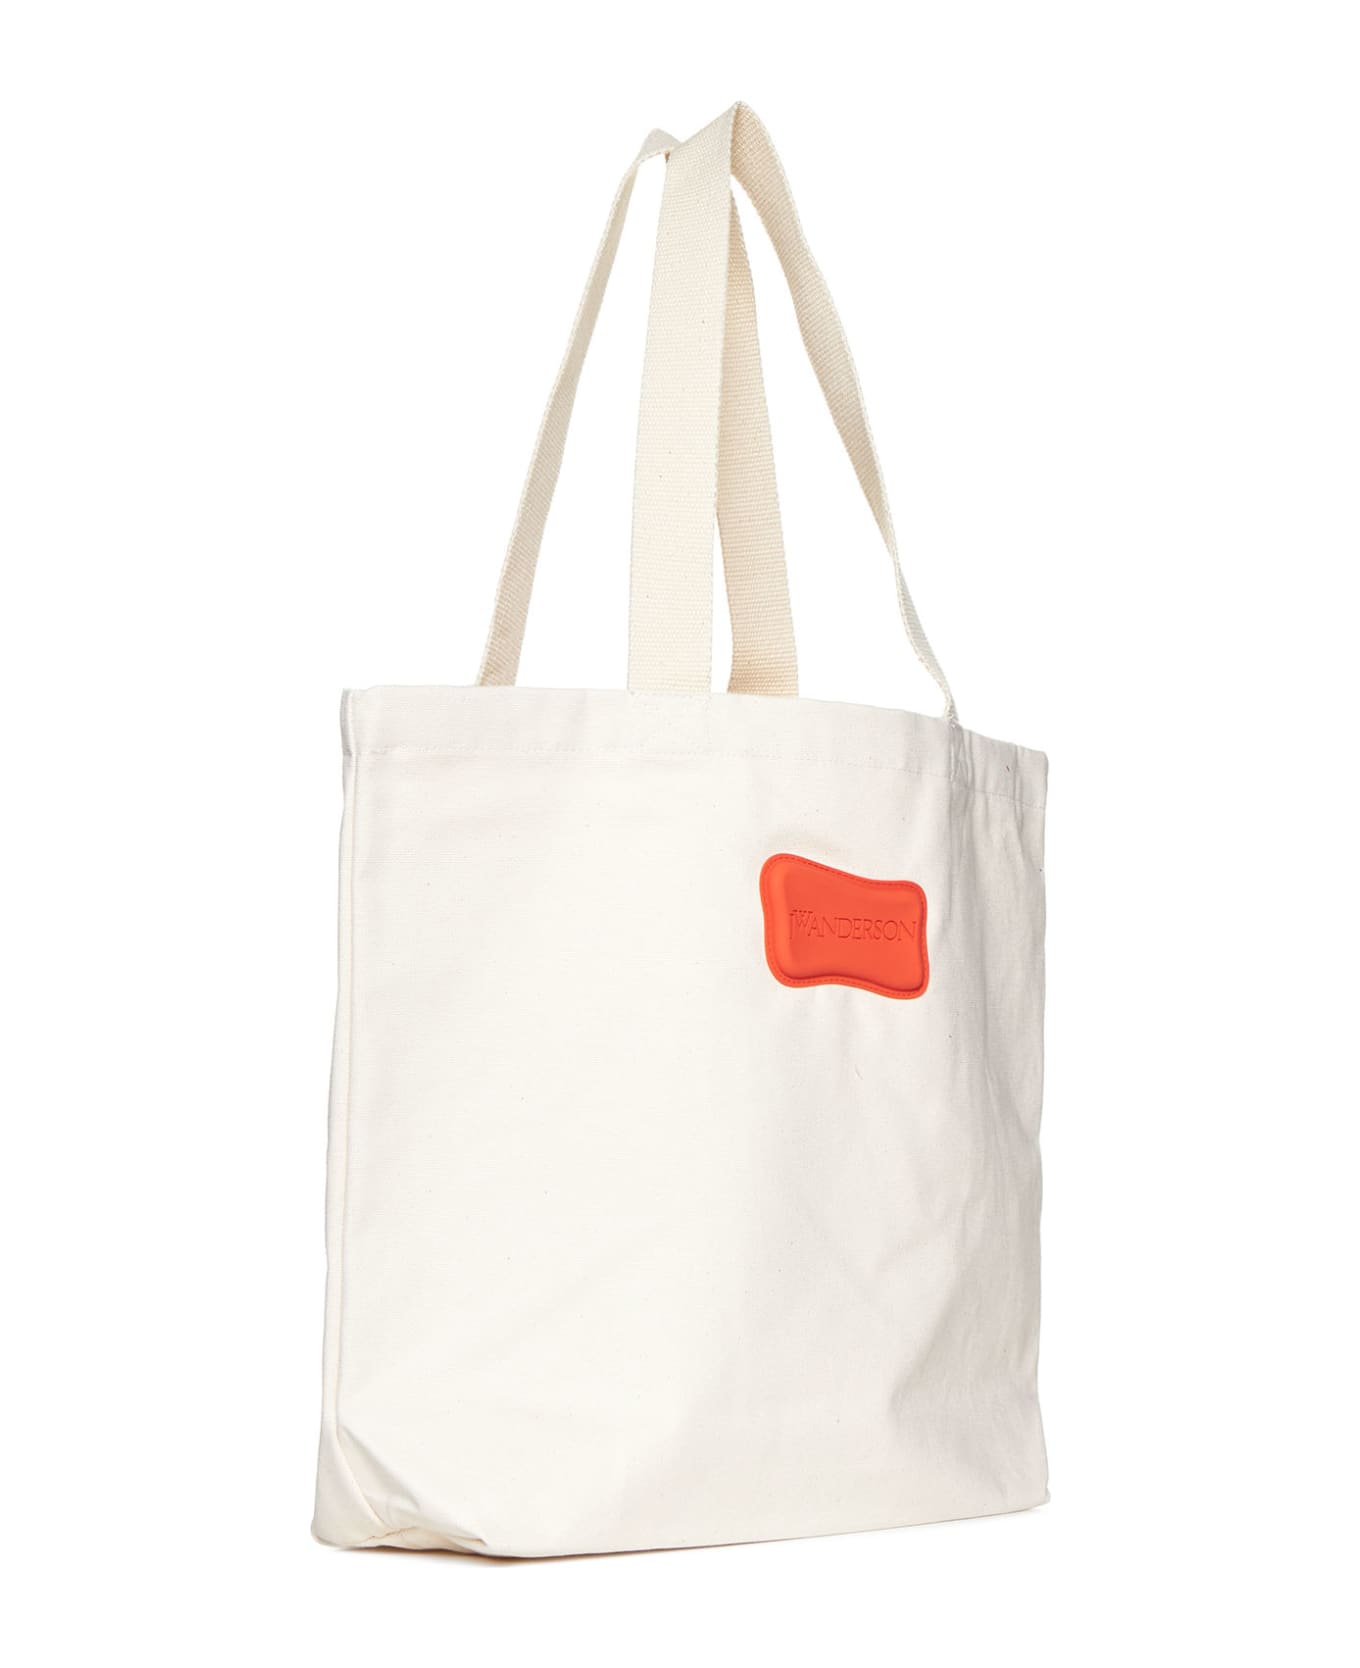 J.W. Anderson Logo Print Canvas Tote Bag - Beige トートバッグ